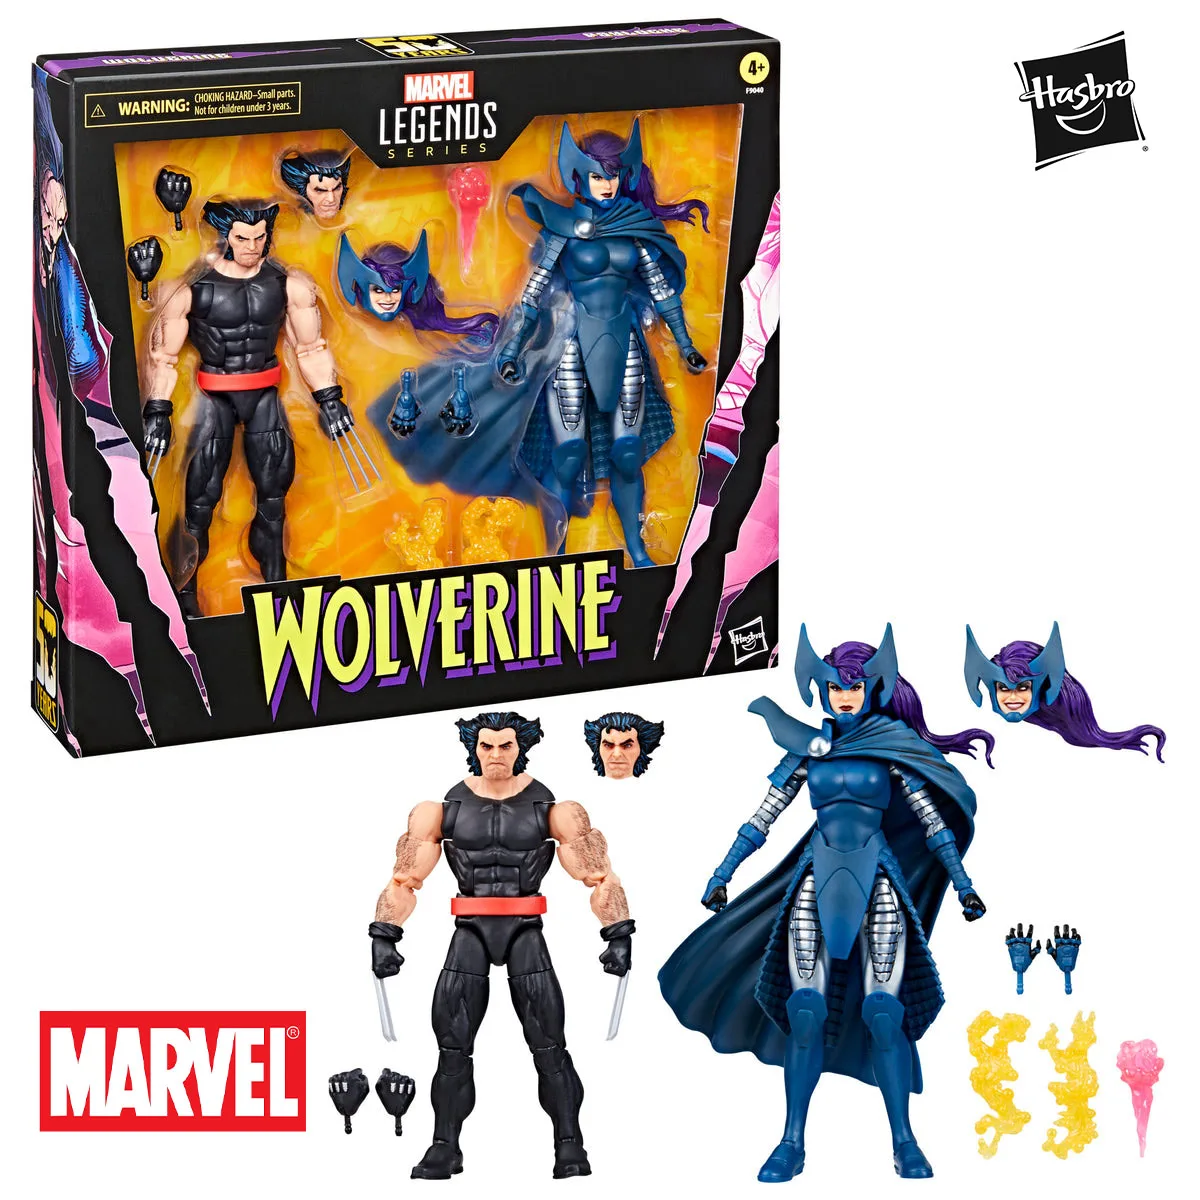  wolverine and psylocke action figure collectible model original birthday gift for boys thumb200